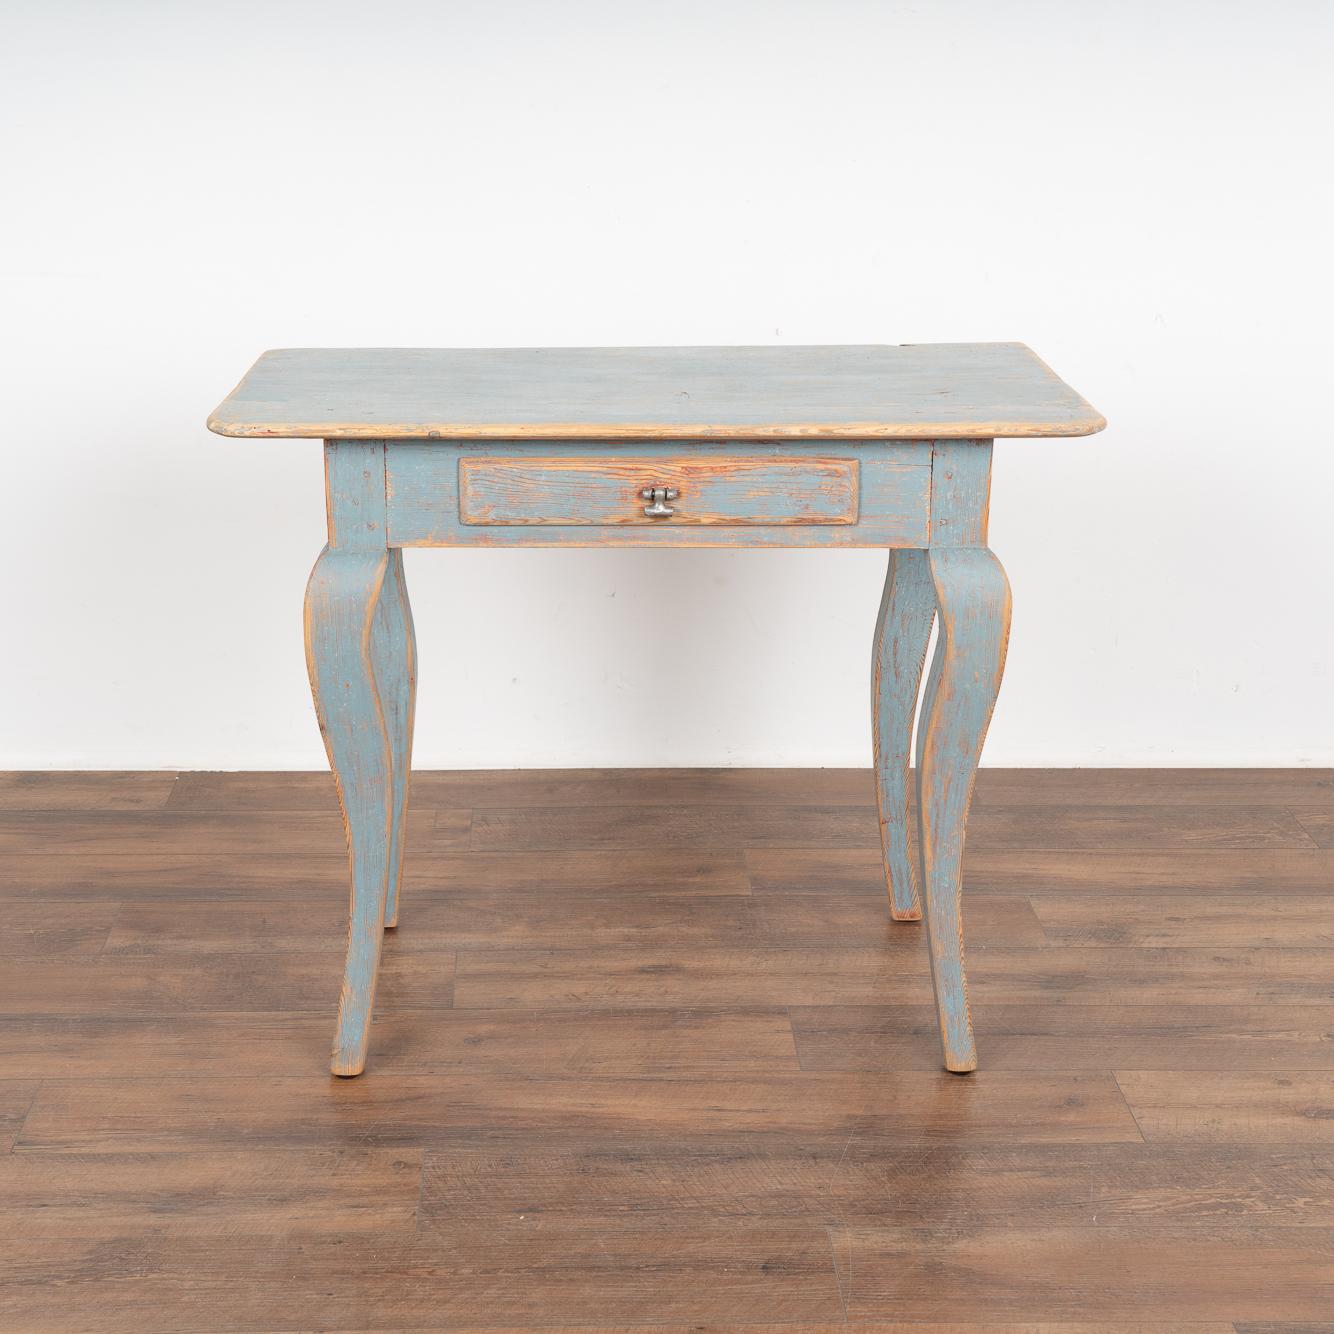 Swedish Blue Painted Pine Side Table With Cabriolet Legs, Sweden circa 1820-40 For Sale